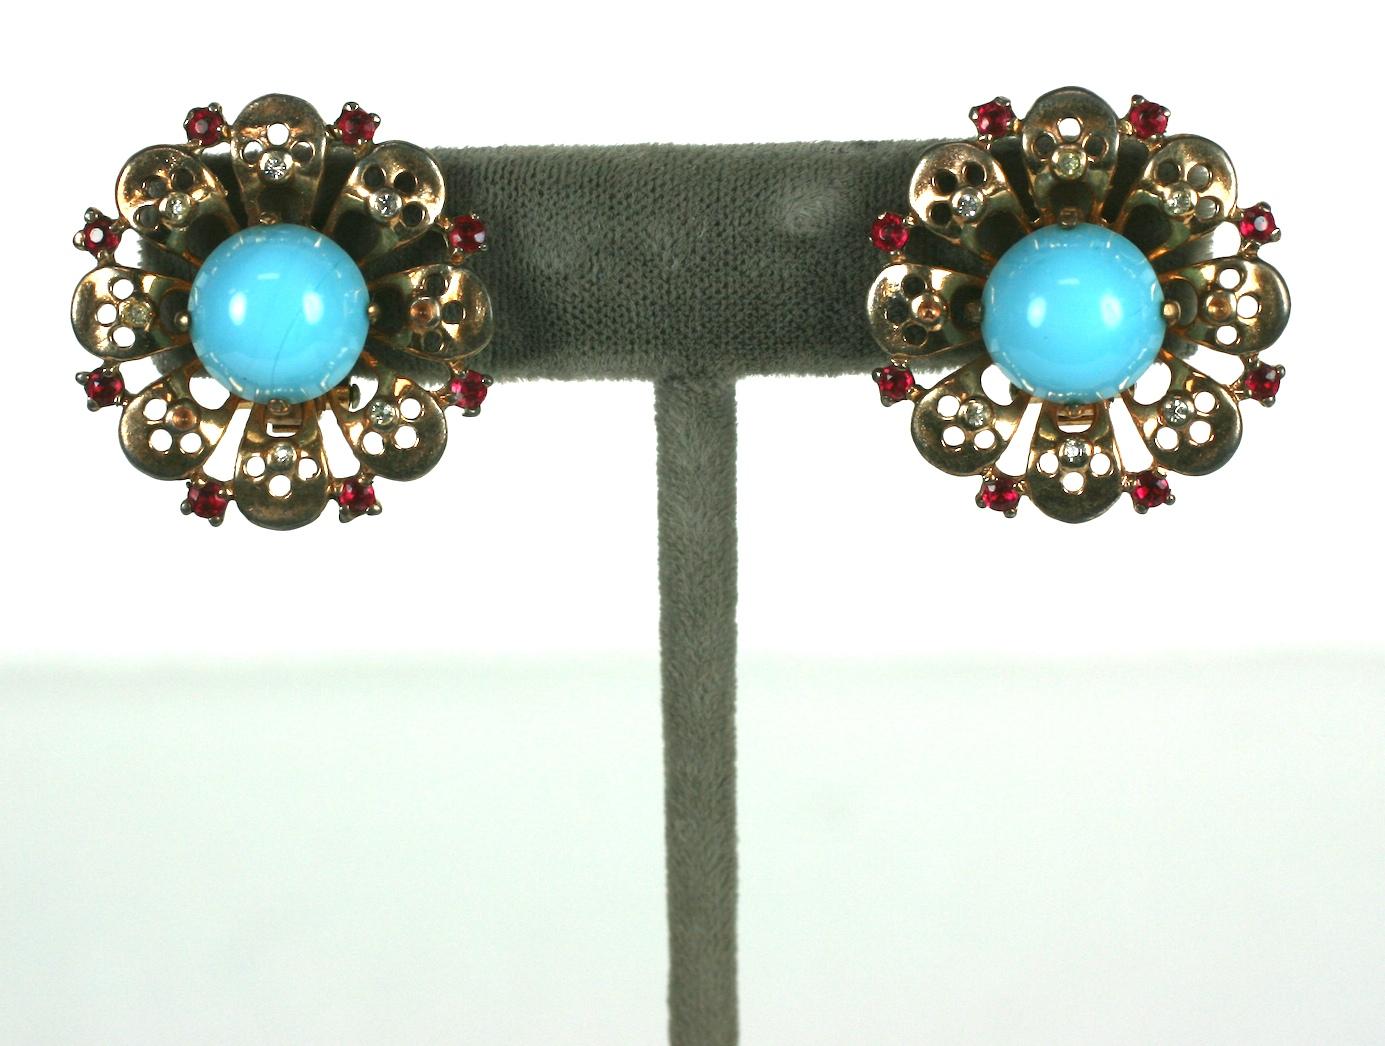 Trifari Retro Sterling Turquoise Earrings from the 1940's. Retro pierced design with faux cab turquoise and ruby pastes by Alfred Phillipe. Vermeil pink gold finish. 
Clip fittings. Matching brooch available. 4.25